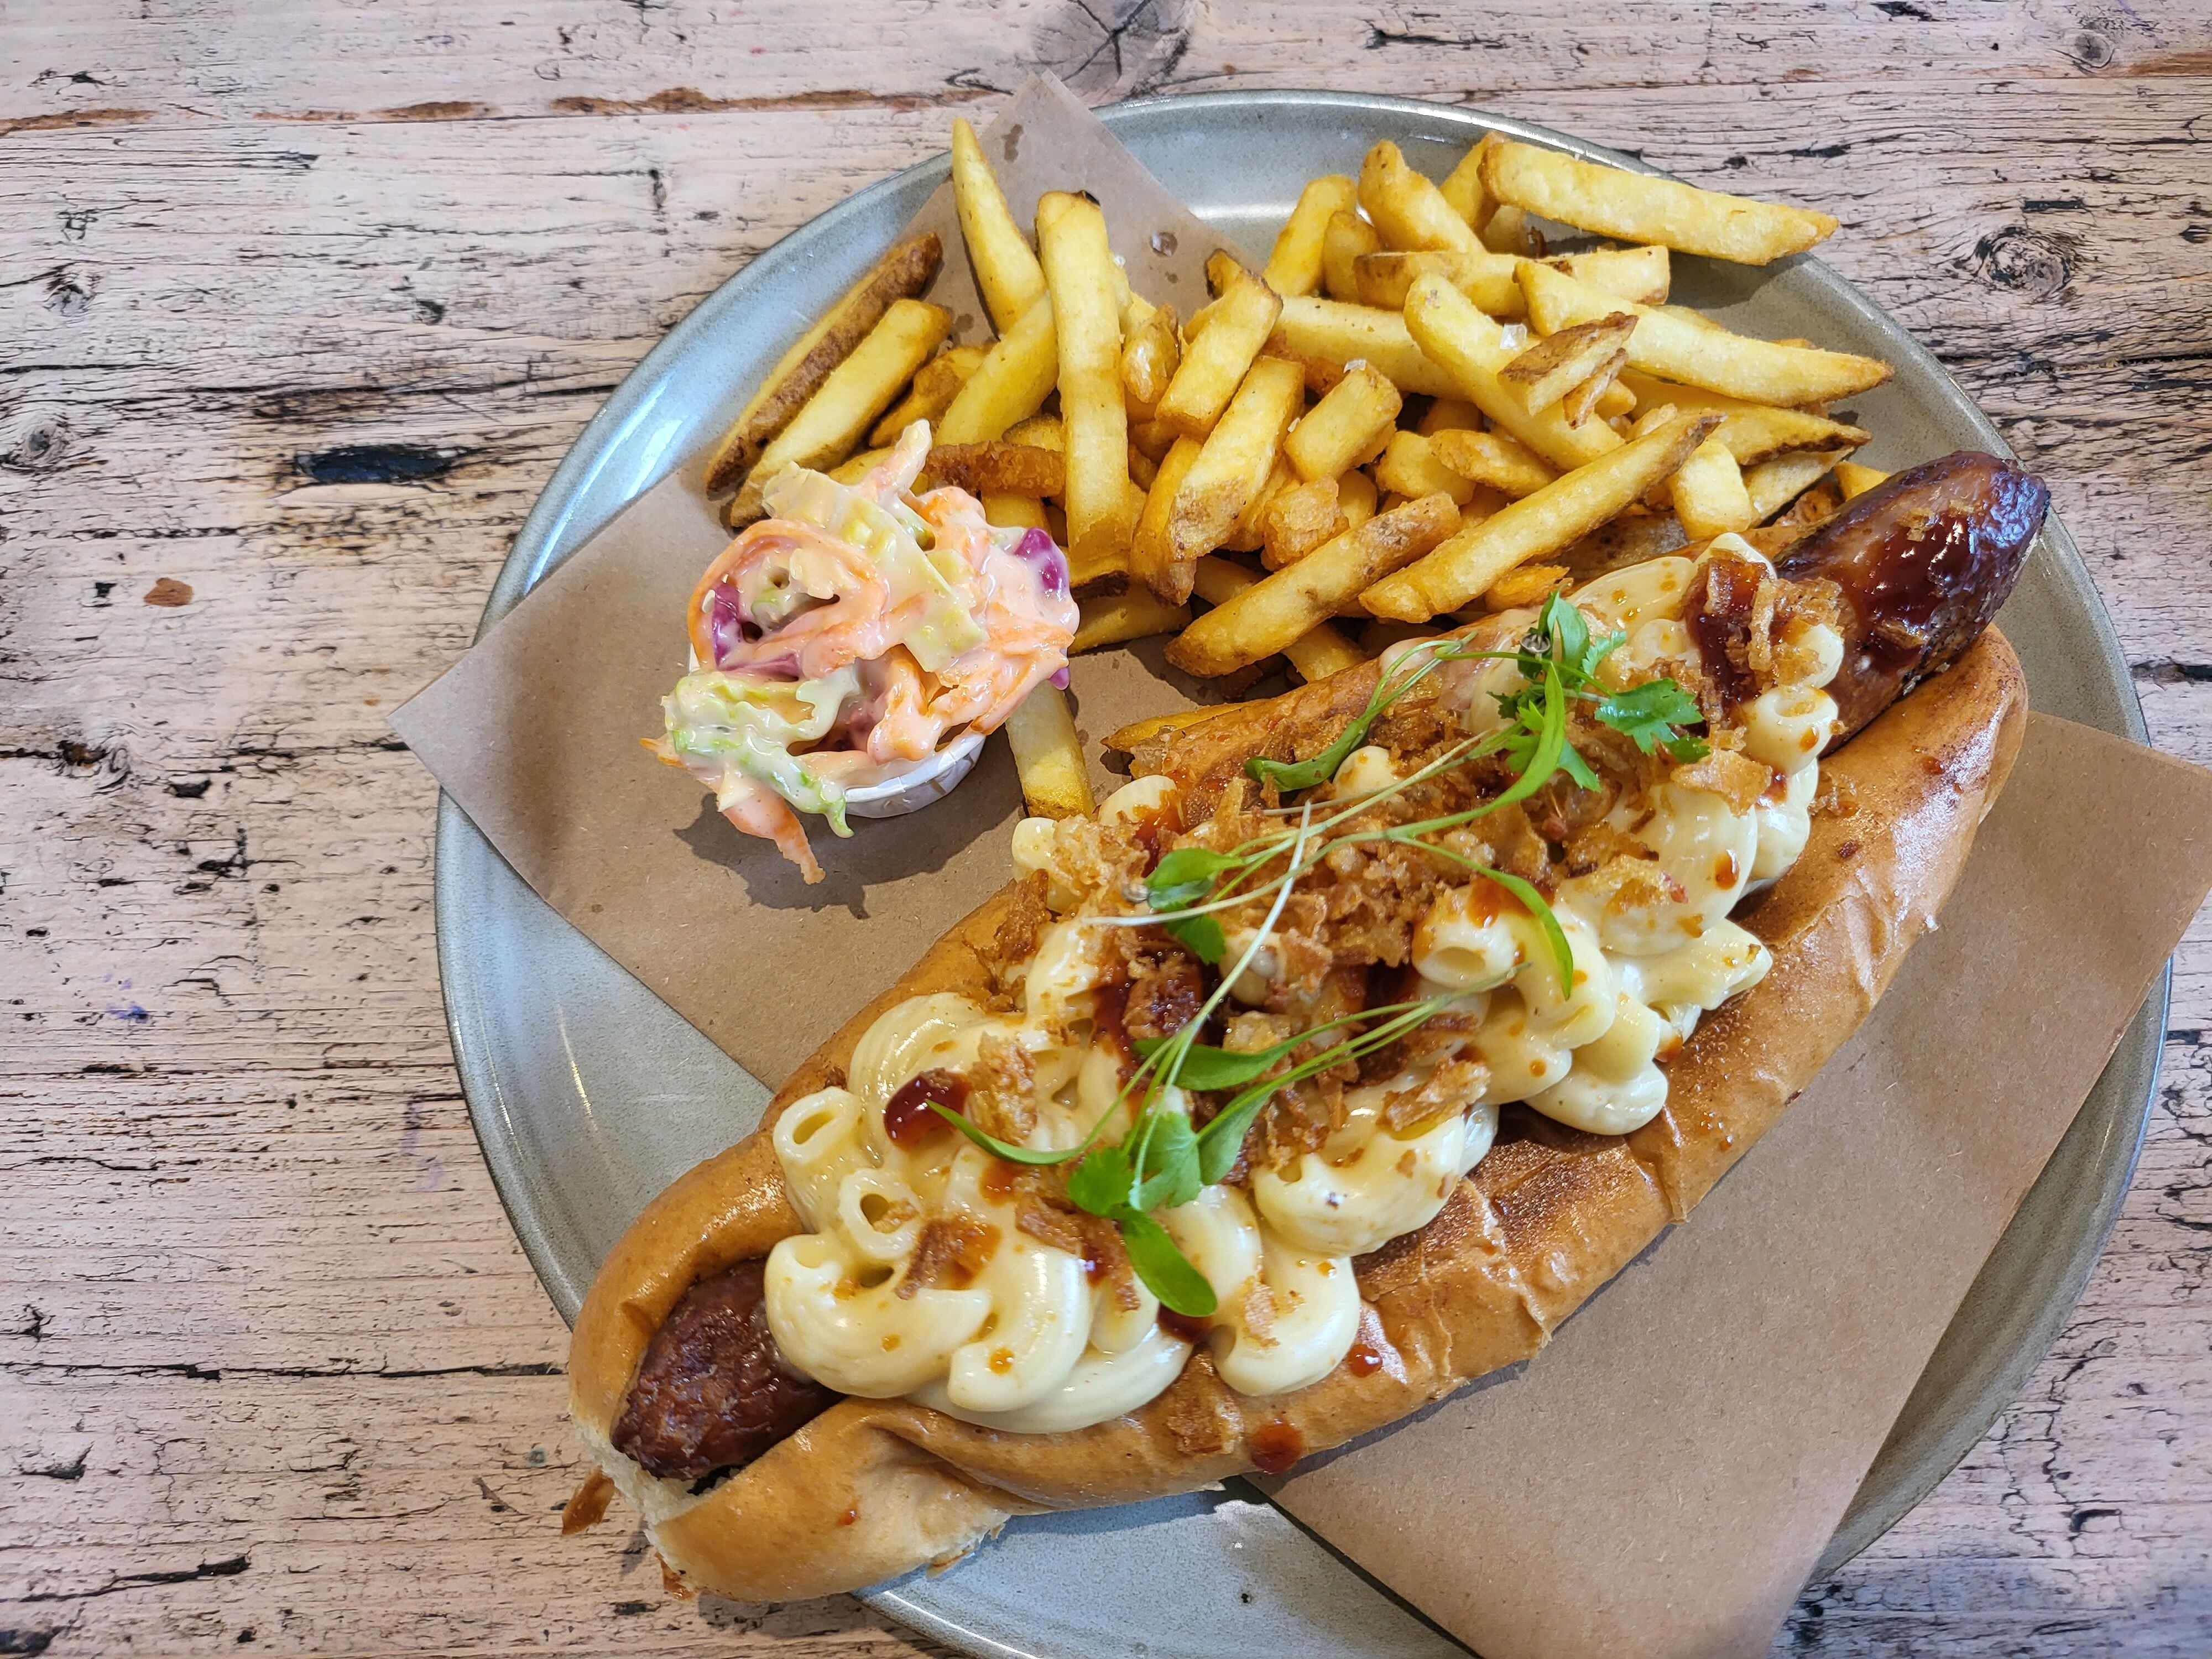 'I had an epic hot dog at a restaurant that's marvellous both inside and out'